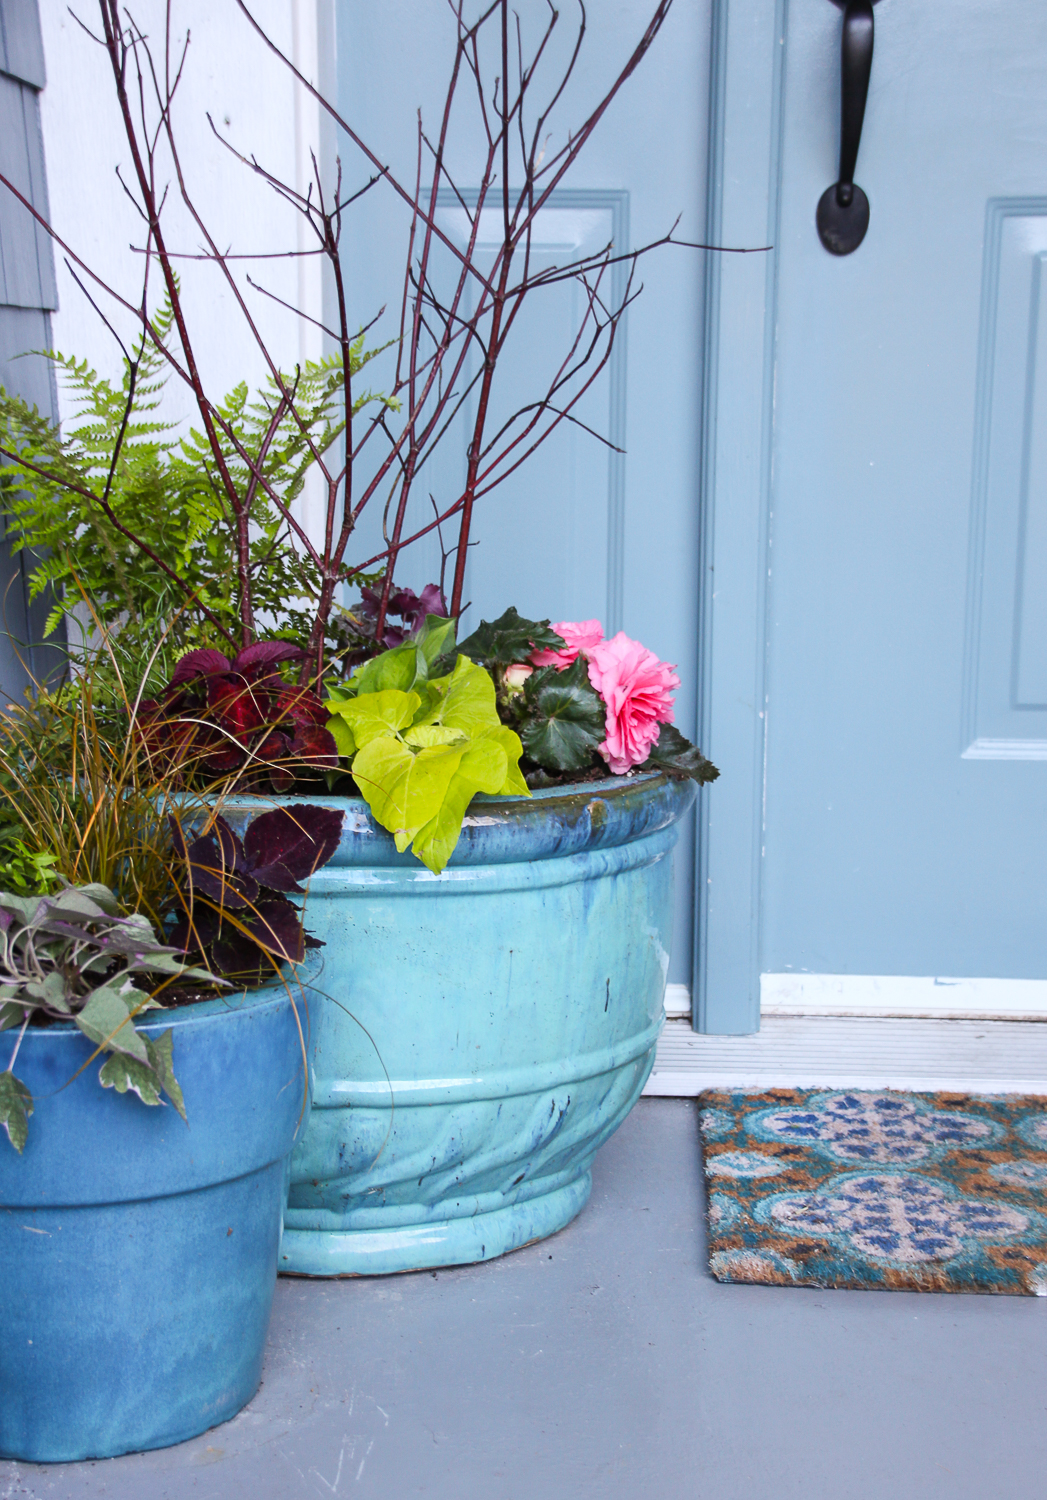 The front door of a house with a porch mat and the shade garden pots beside it.